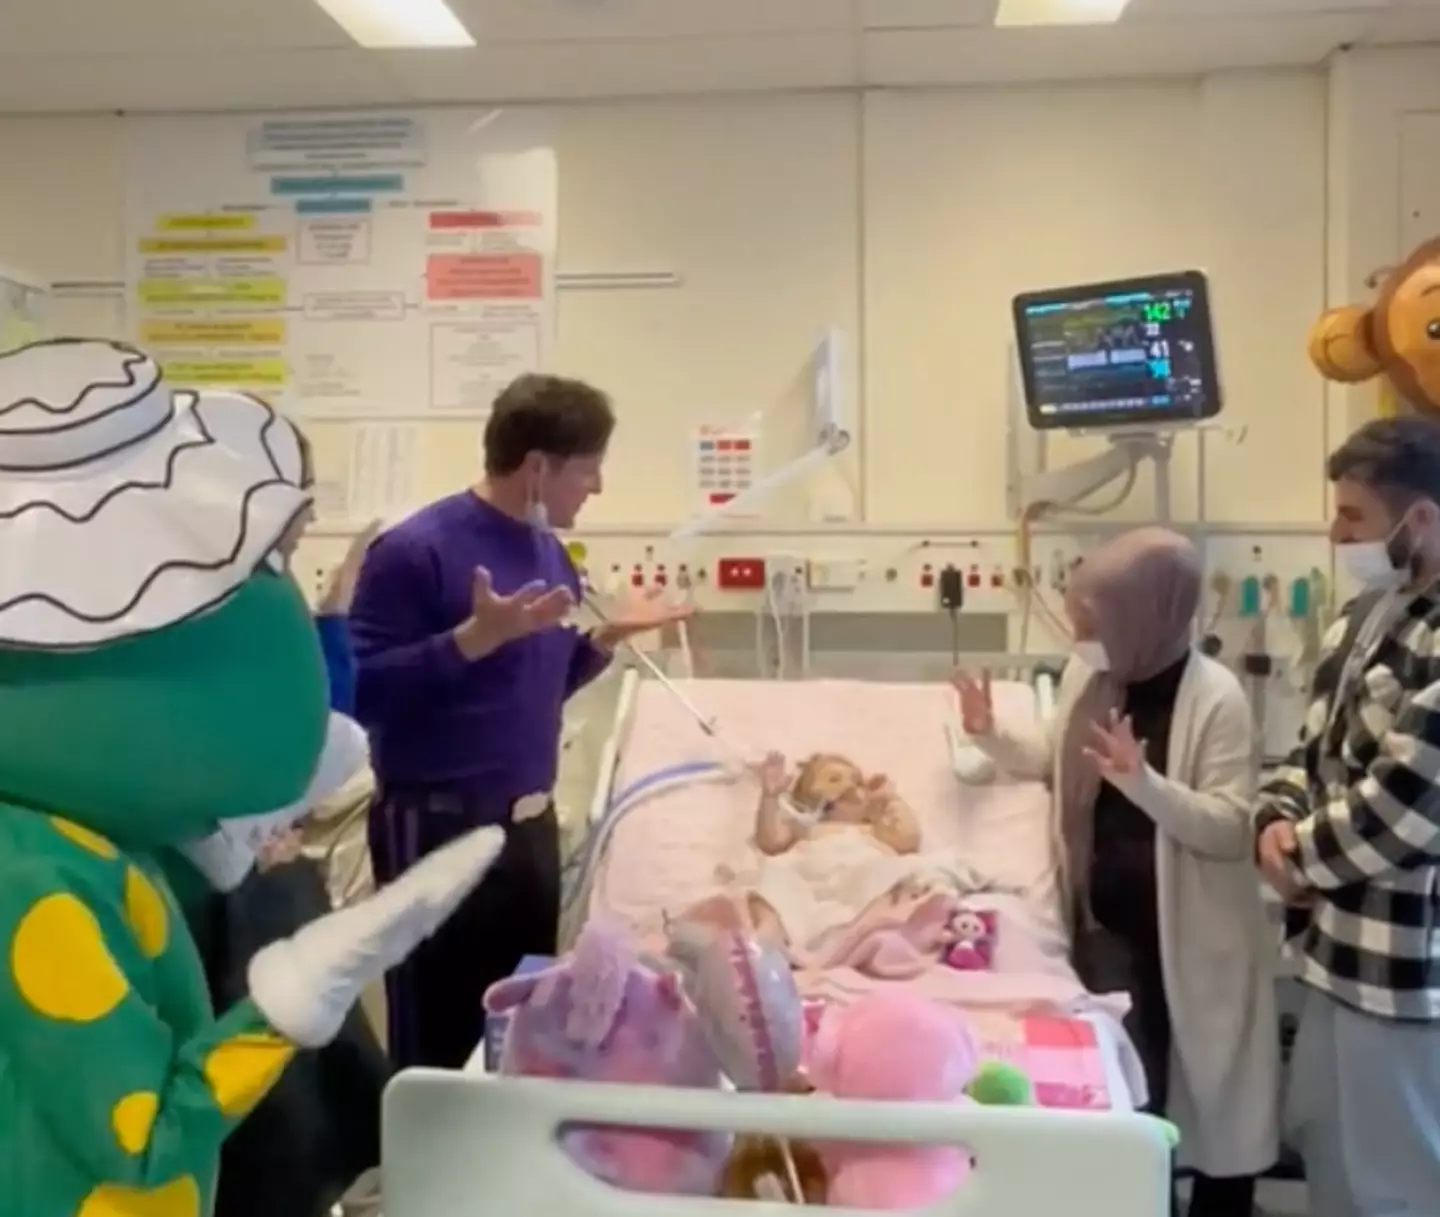 Zahra raised her hands and danced along with The Wiggles from her hospital bed.